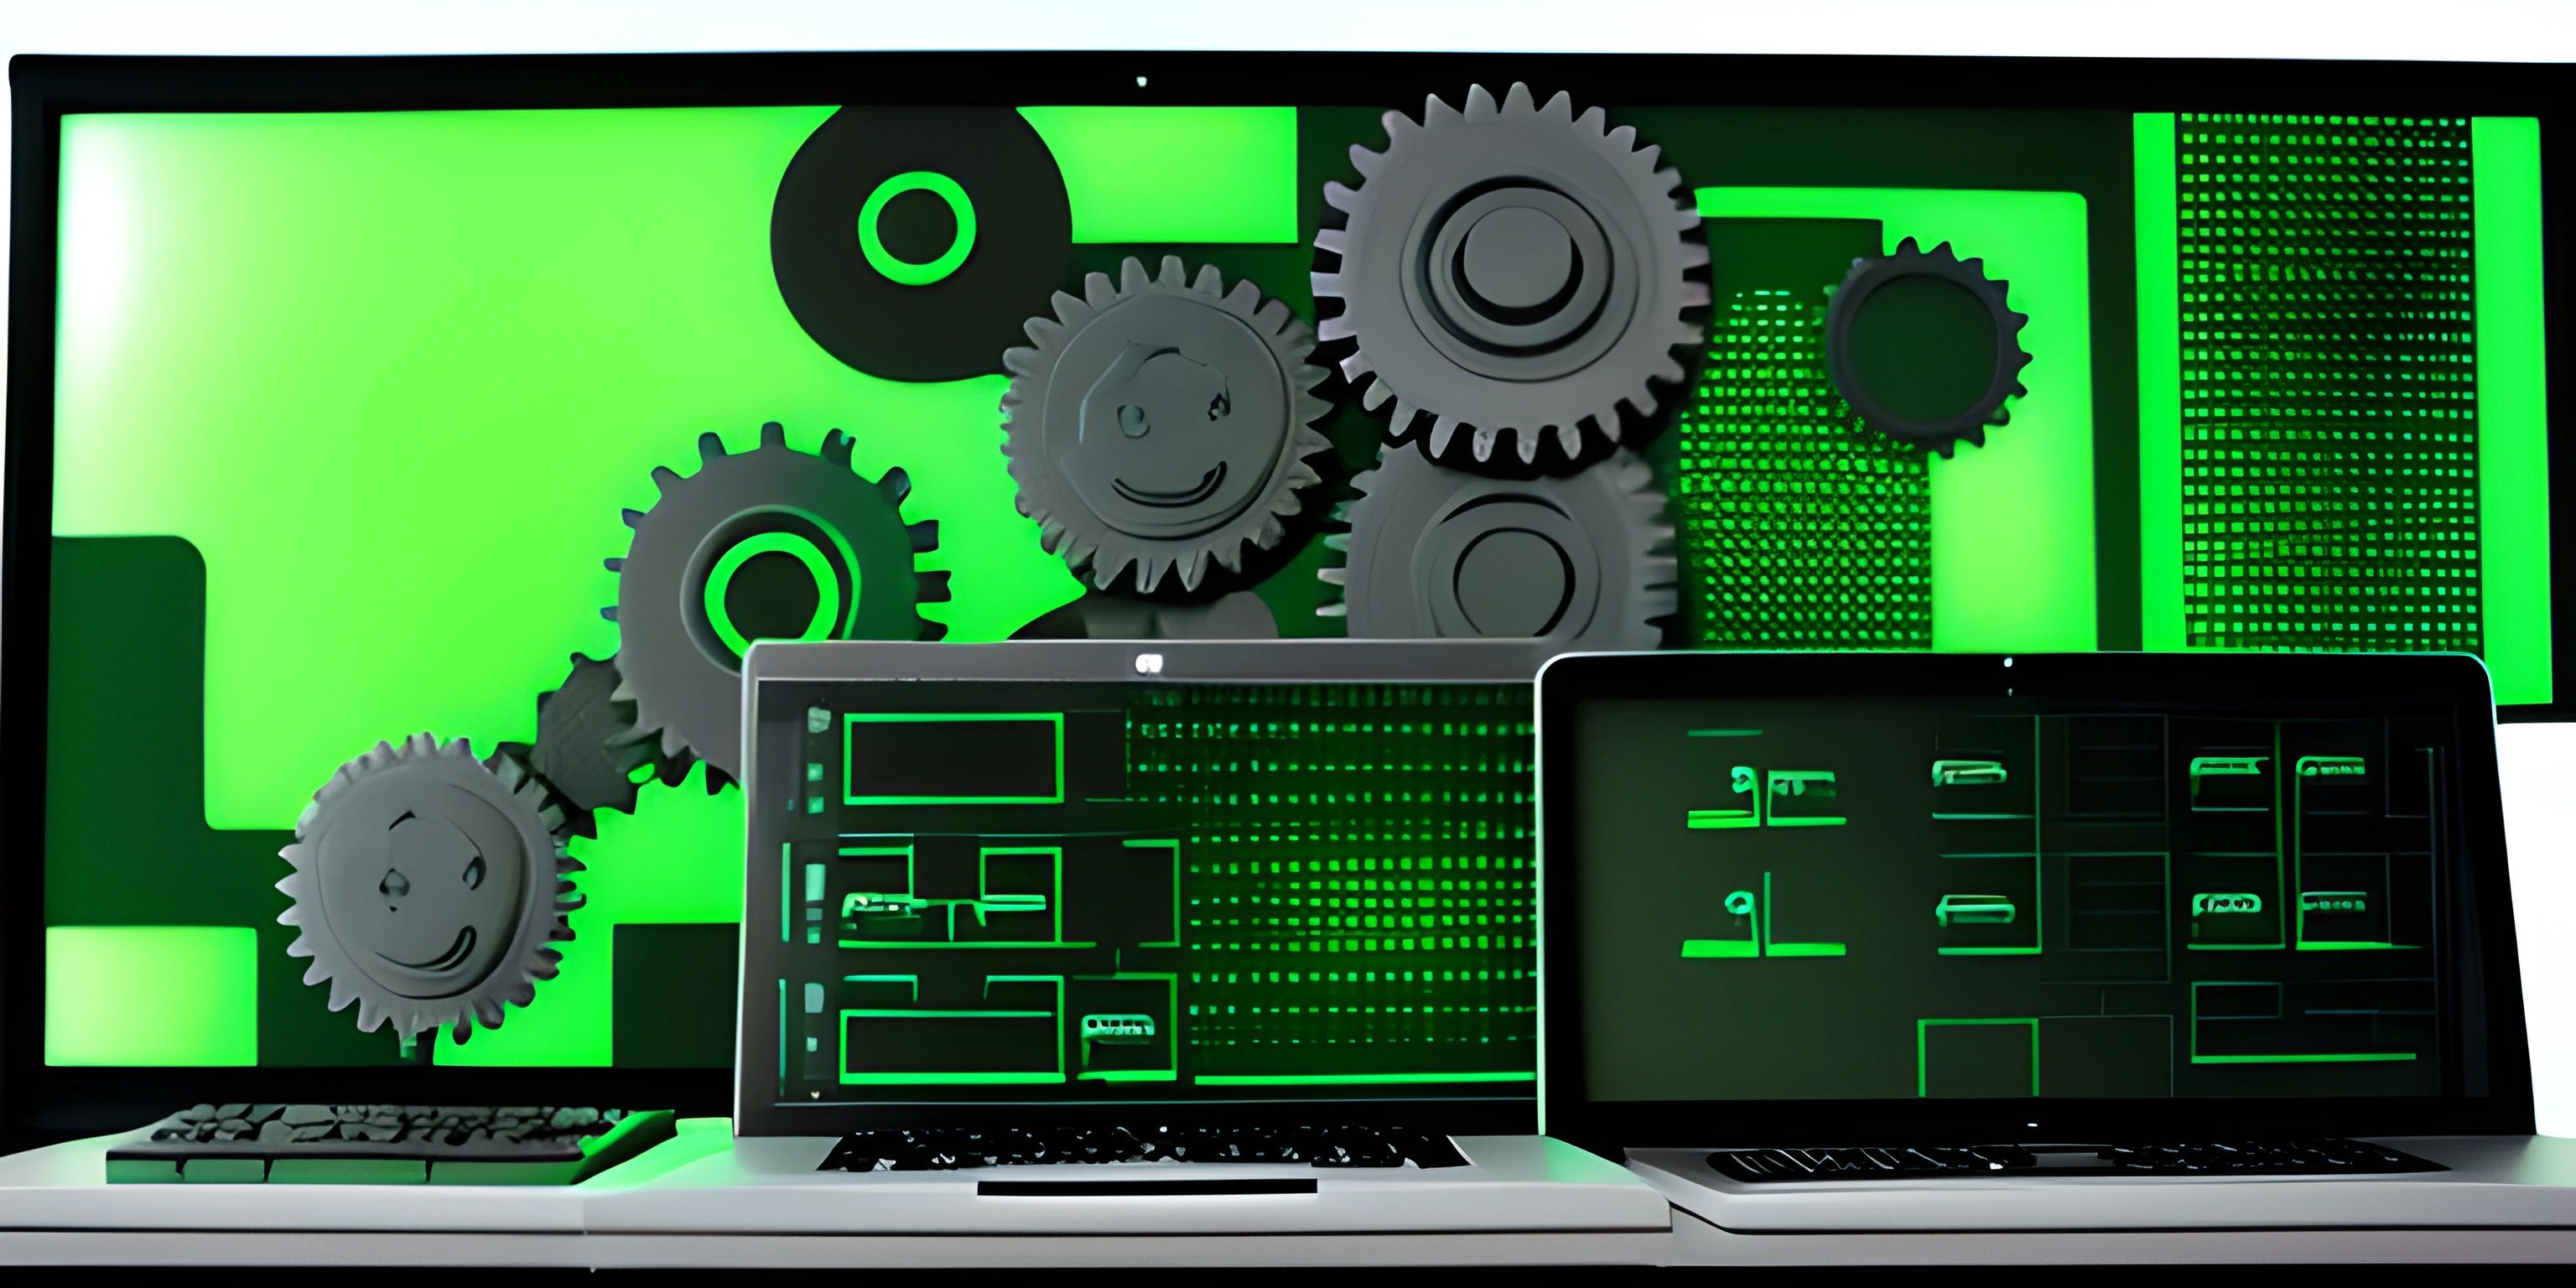 several computers on display with green screen and gears in the background to depict cyber technologies